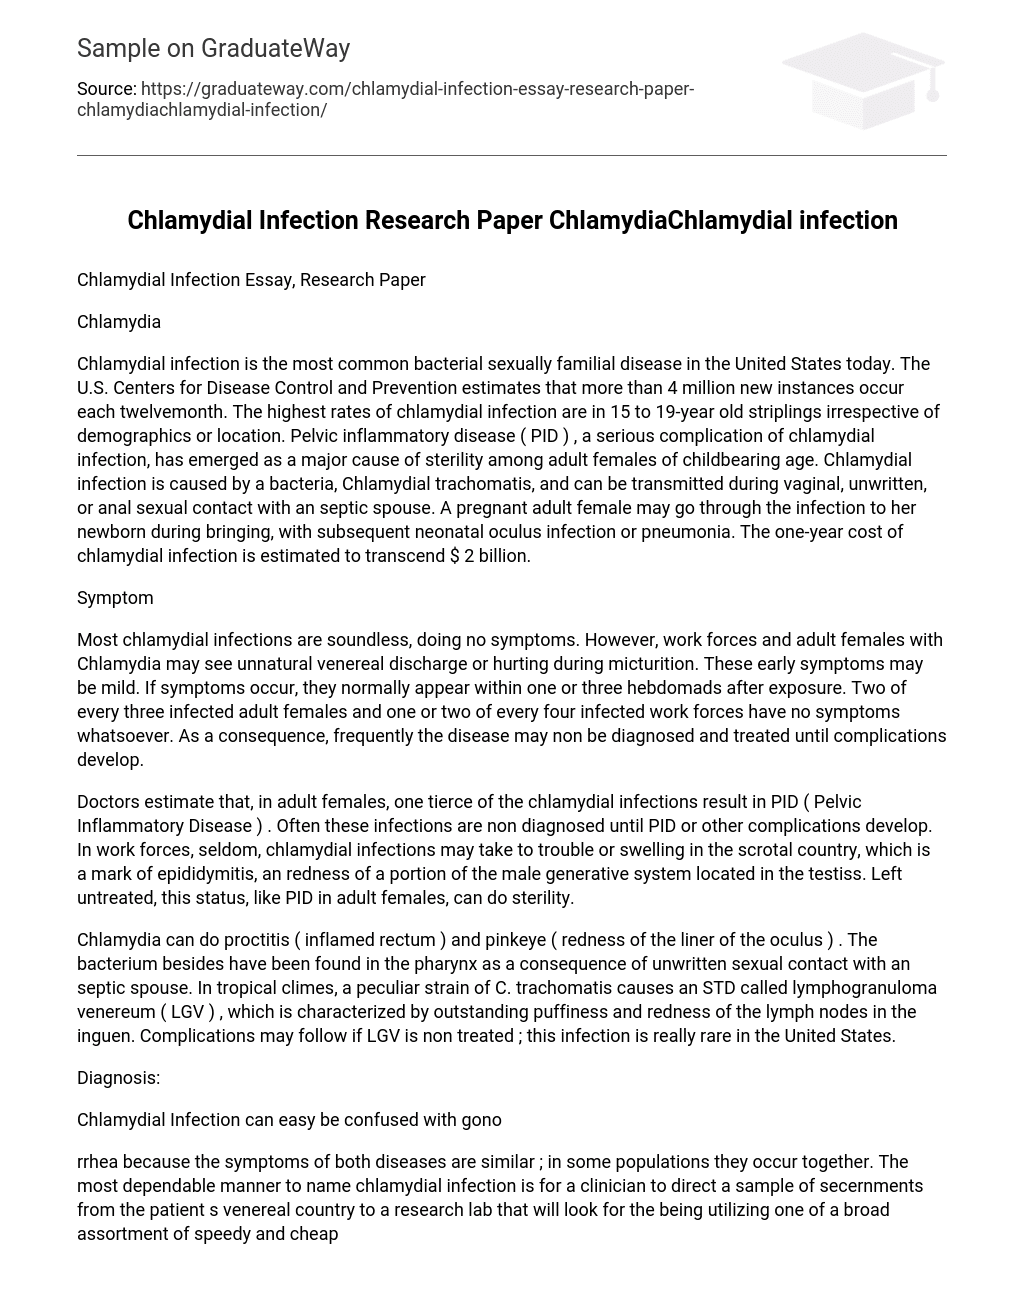 Chlamydial Infection Research Paper